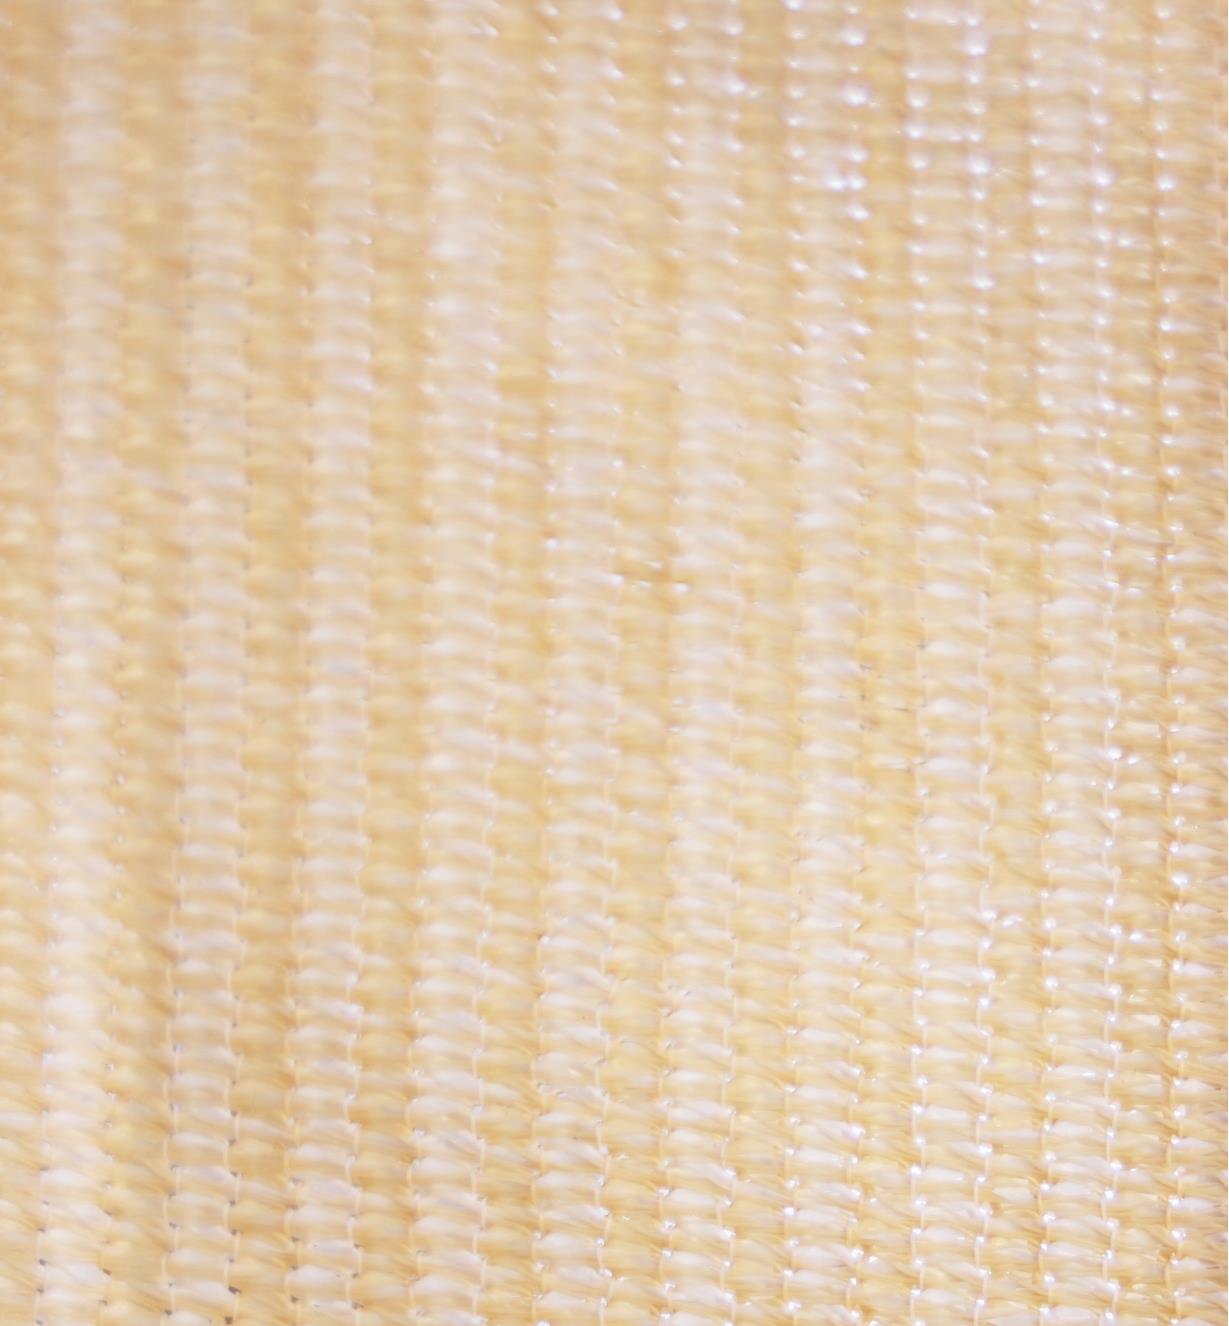 Close-up of knitted polyethylene fabric